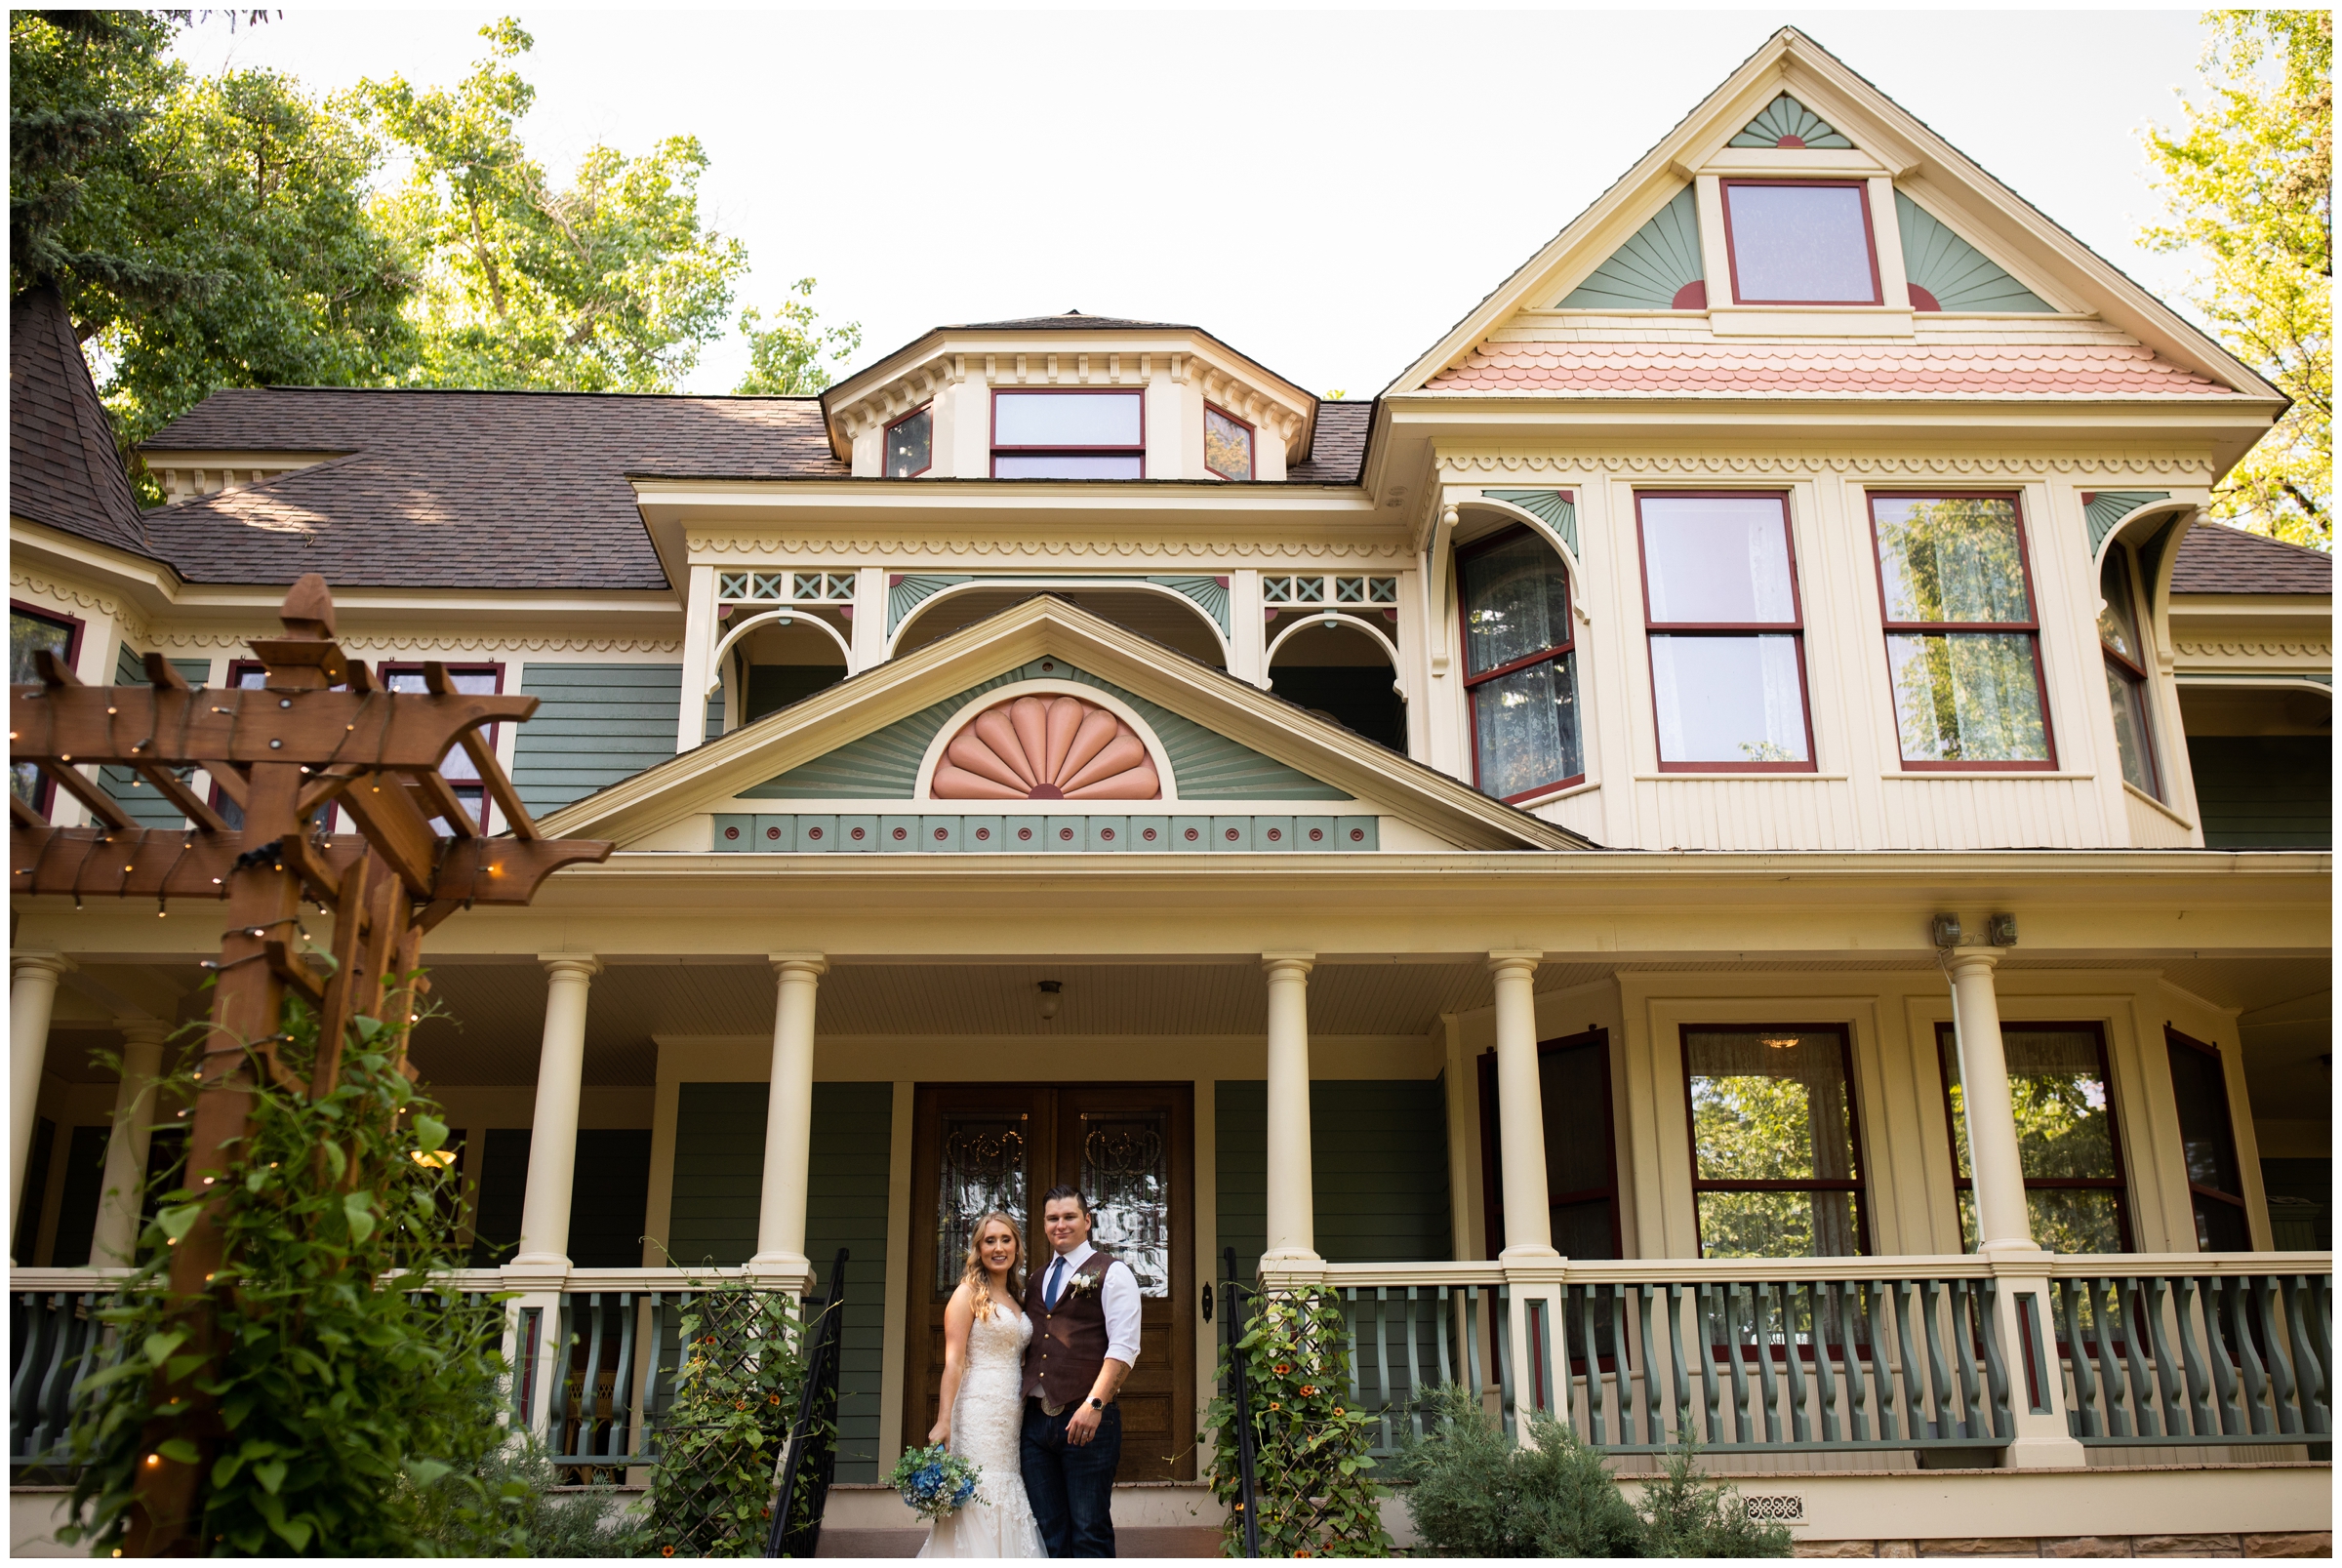 Tapestry House wedding pictures during summer by Fort Collins photographer Plum Pretty Photography